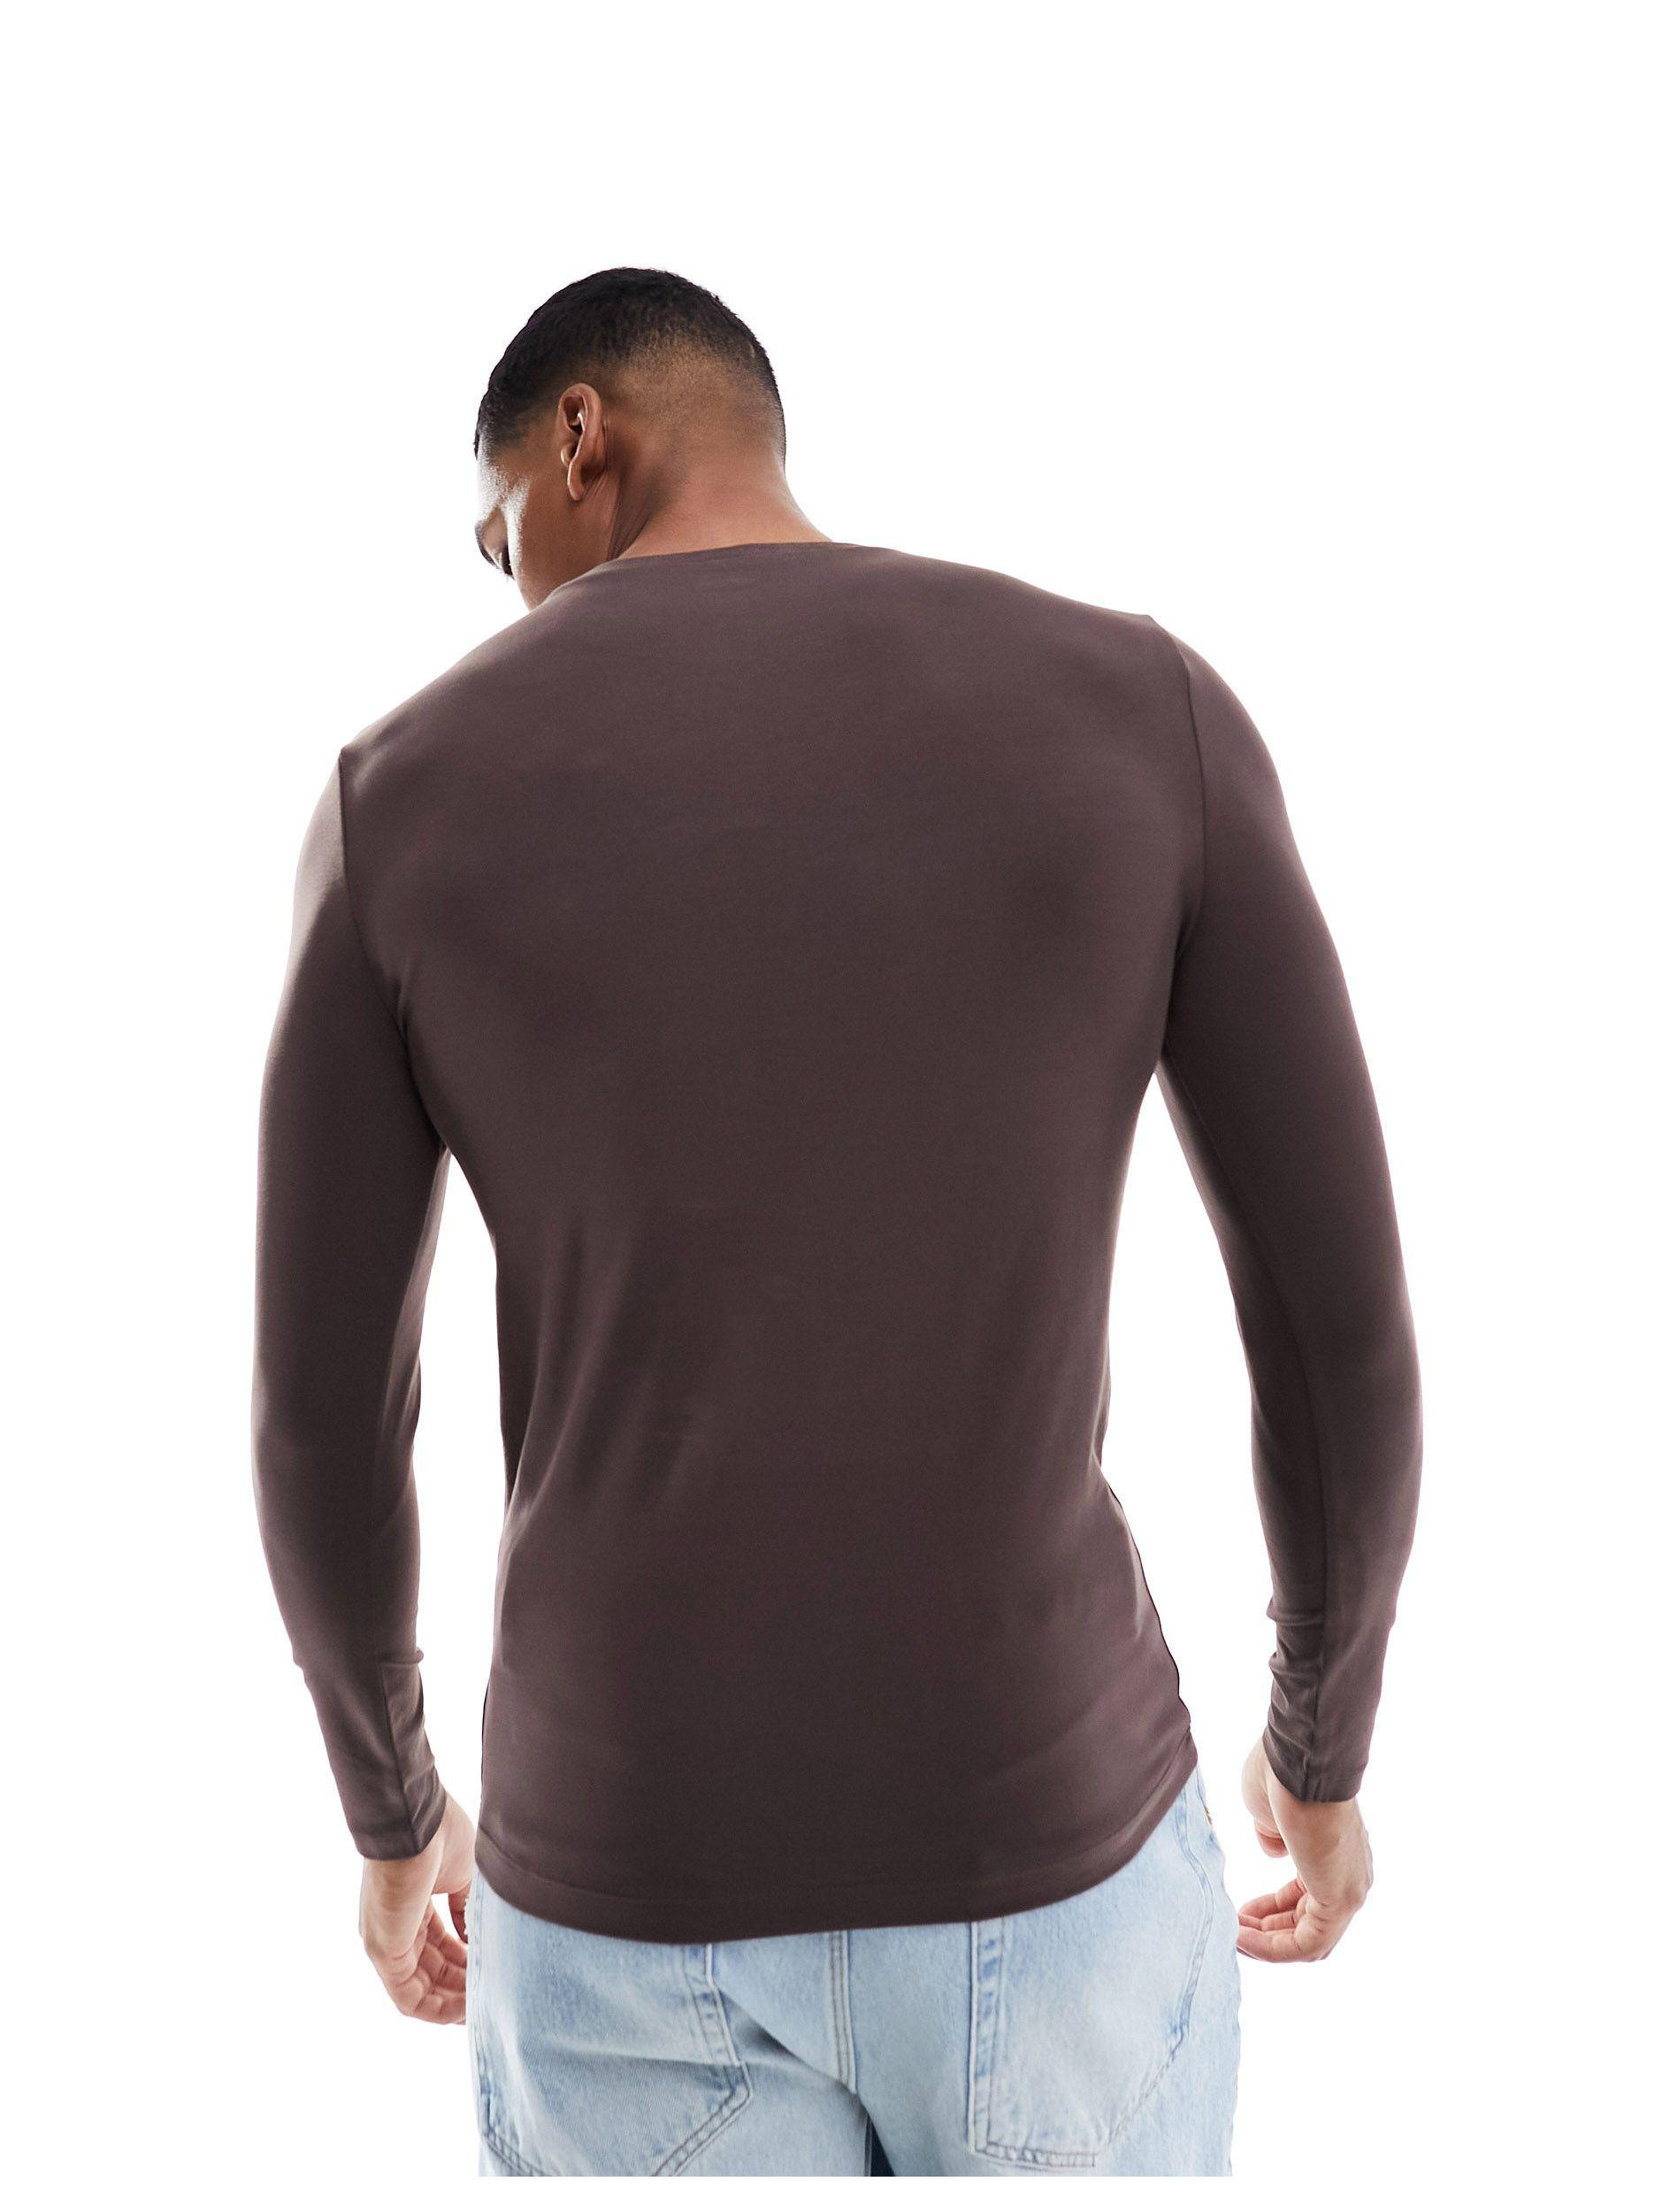 Long sleeve muscle fit t shirt